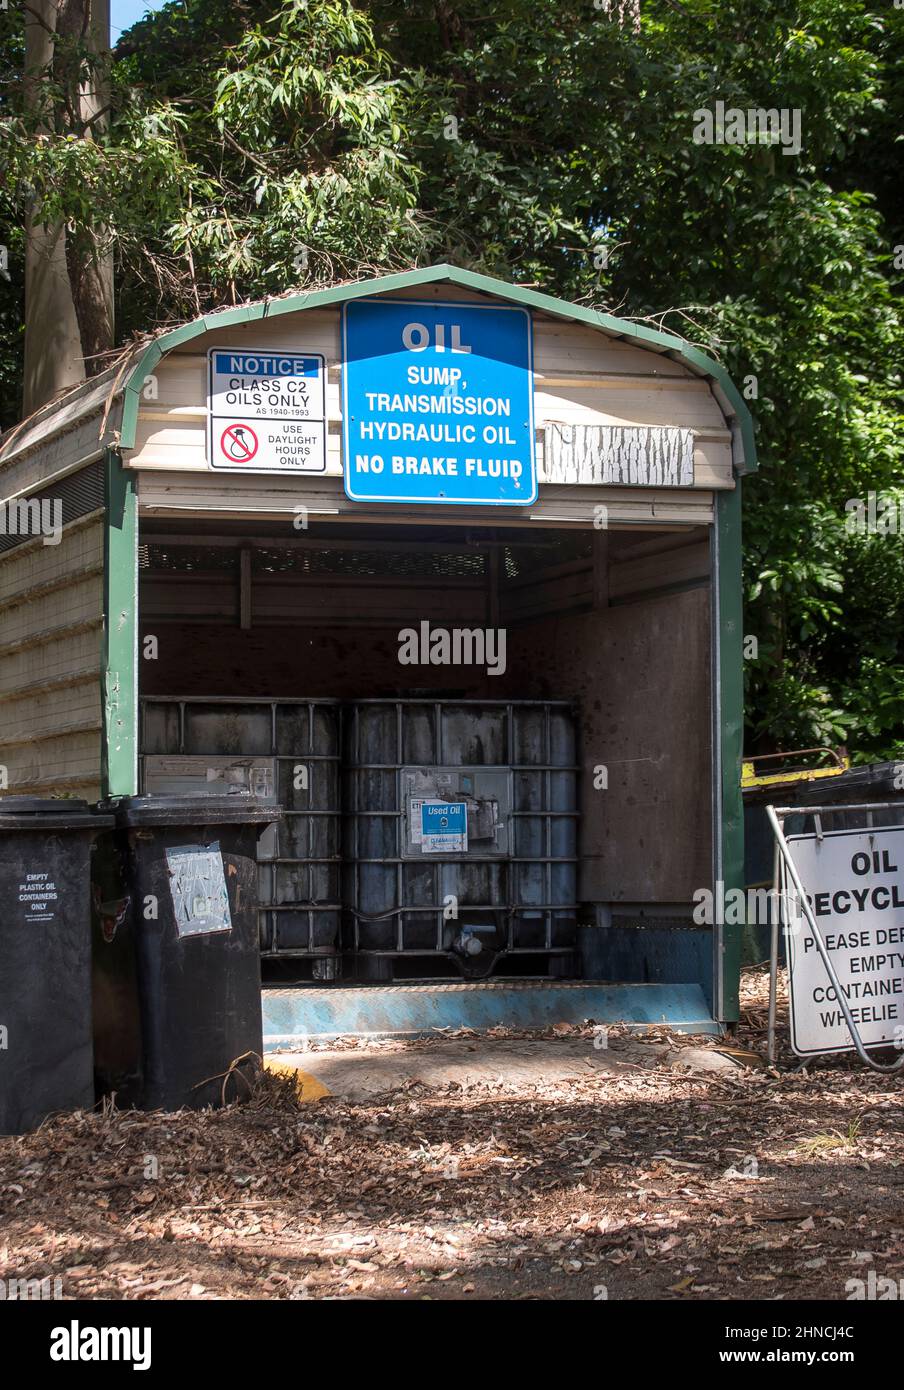 Waste oil disposal facility at small rural recycling site in Queensland, Australia. Notice boards of instructions. Small hut in rainforest setting. Stock Photo